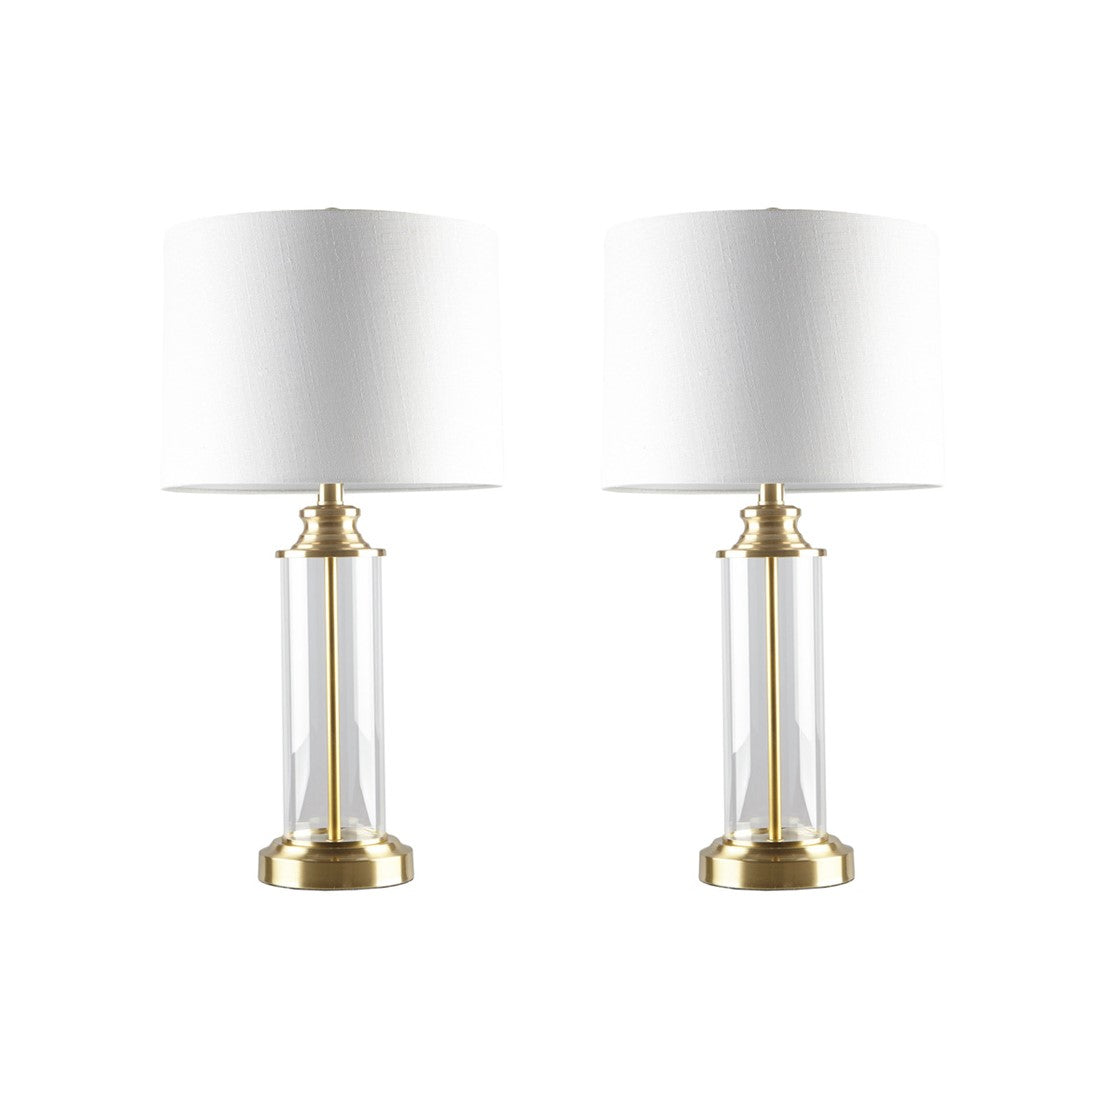 Clarity Gold Table Lamp Set of 2